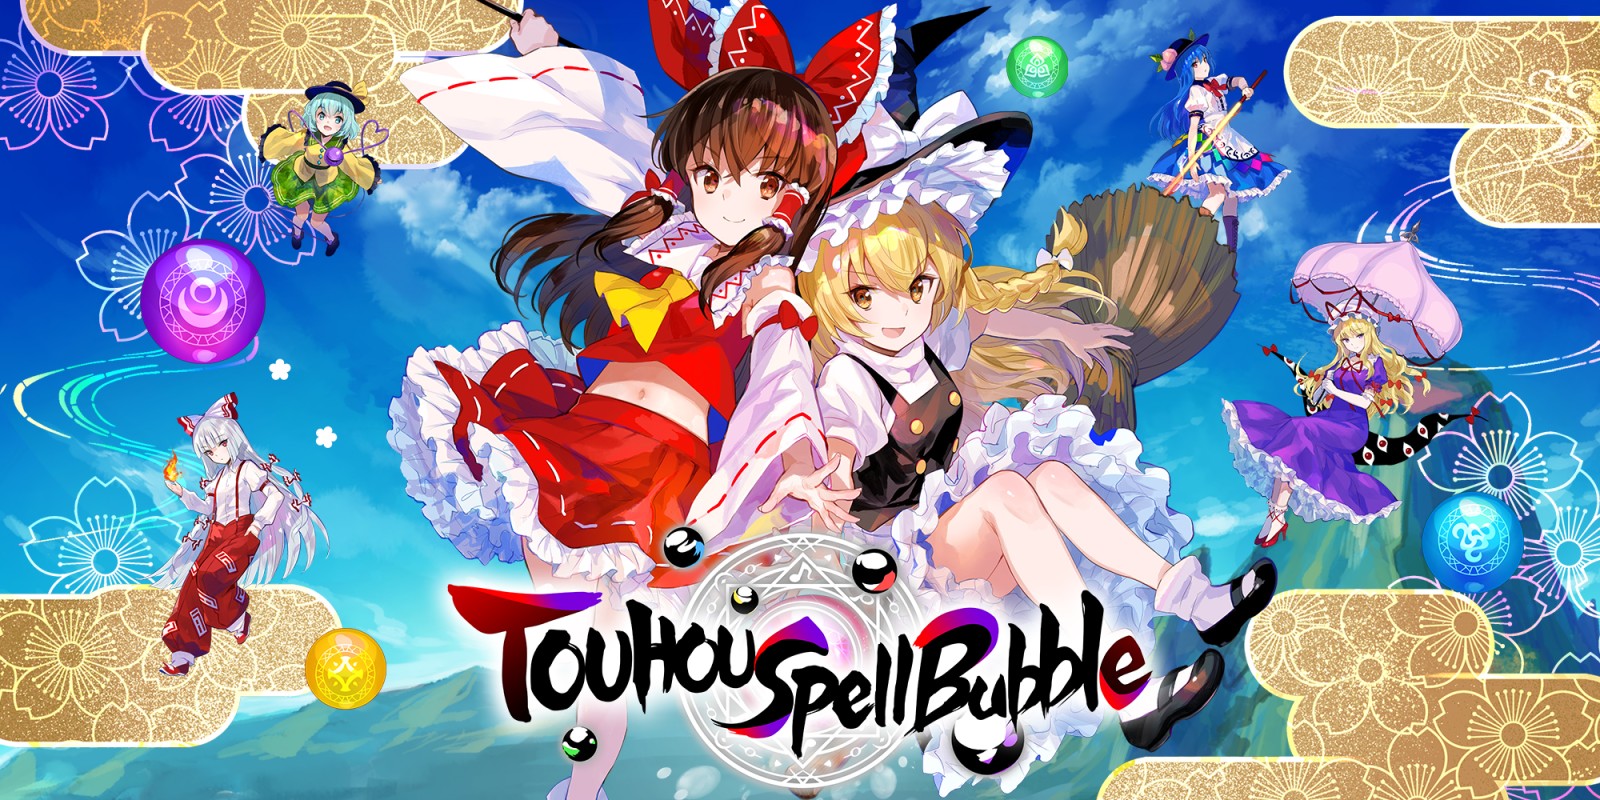 Touhou spell bubble Nintendo Switch download software